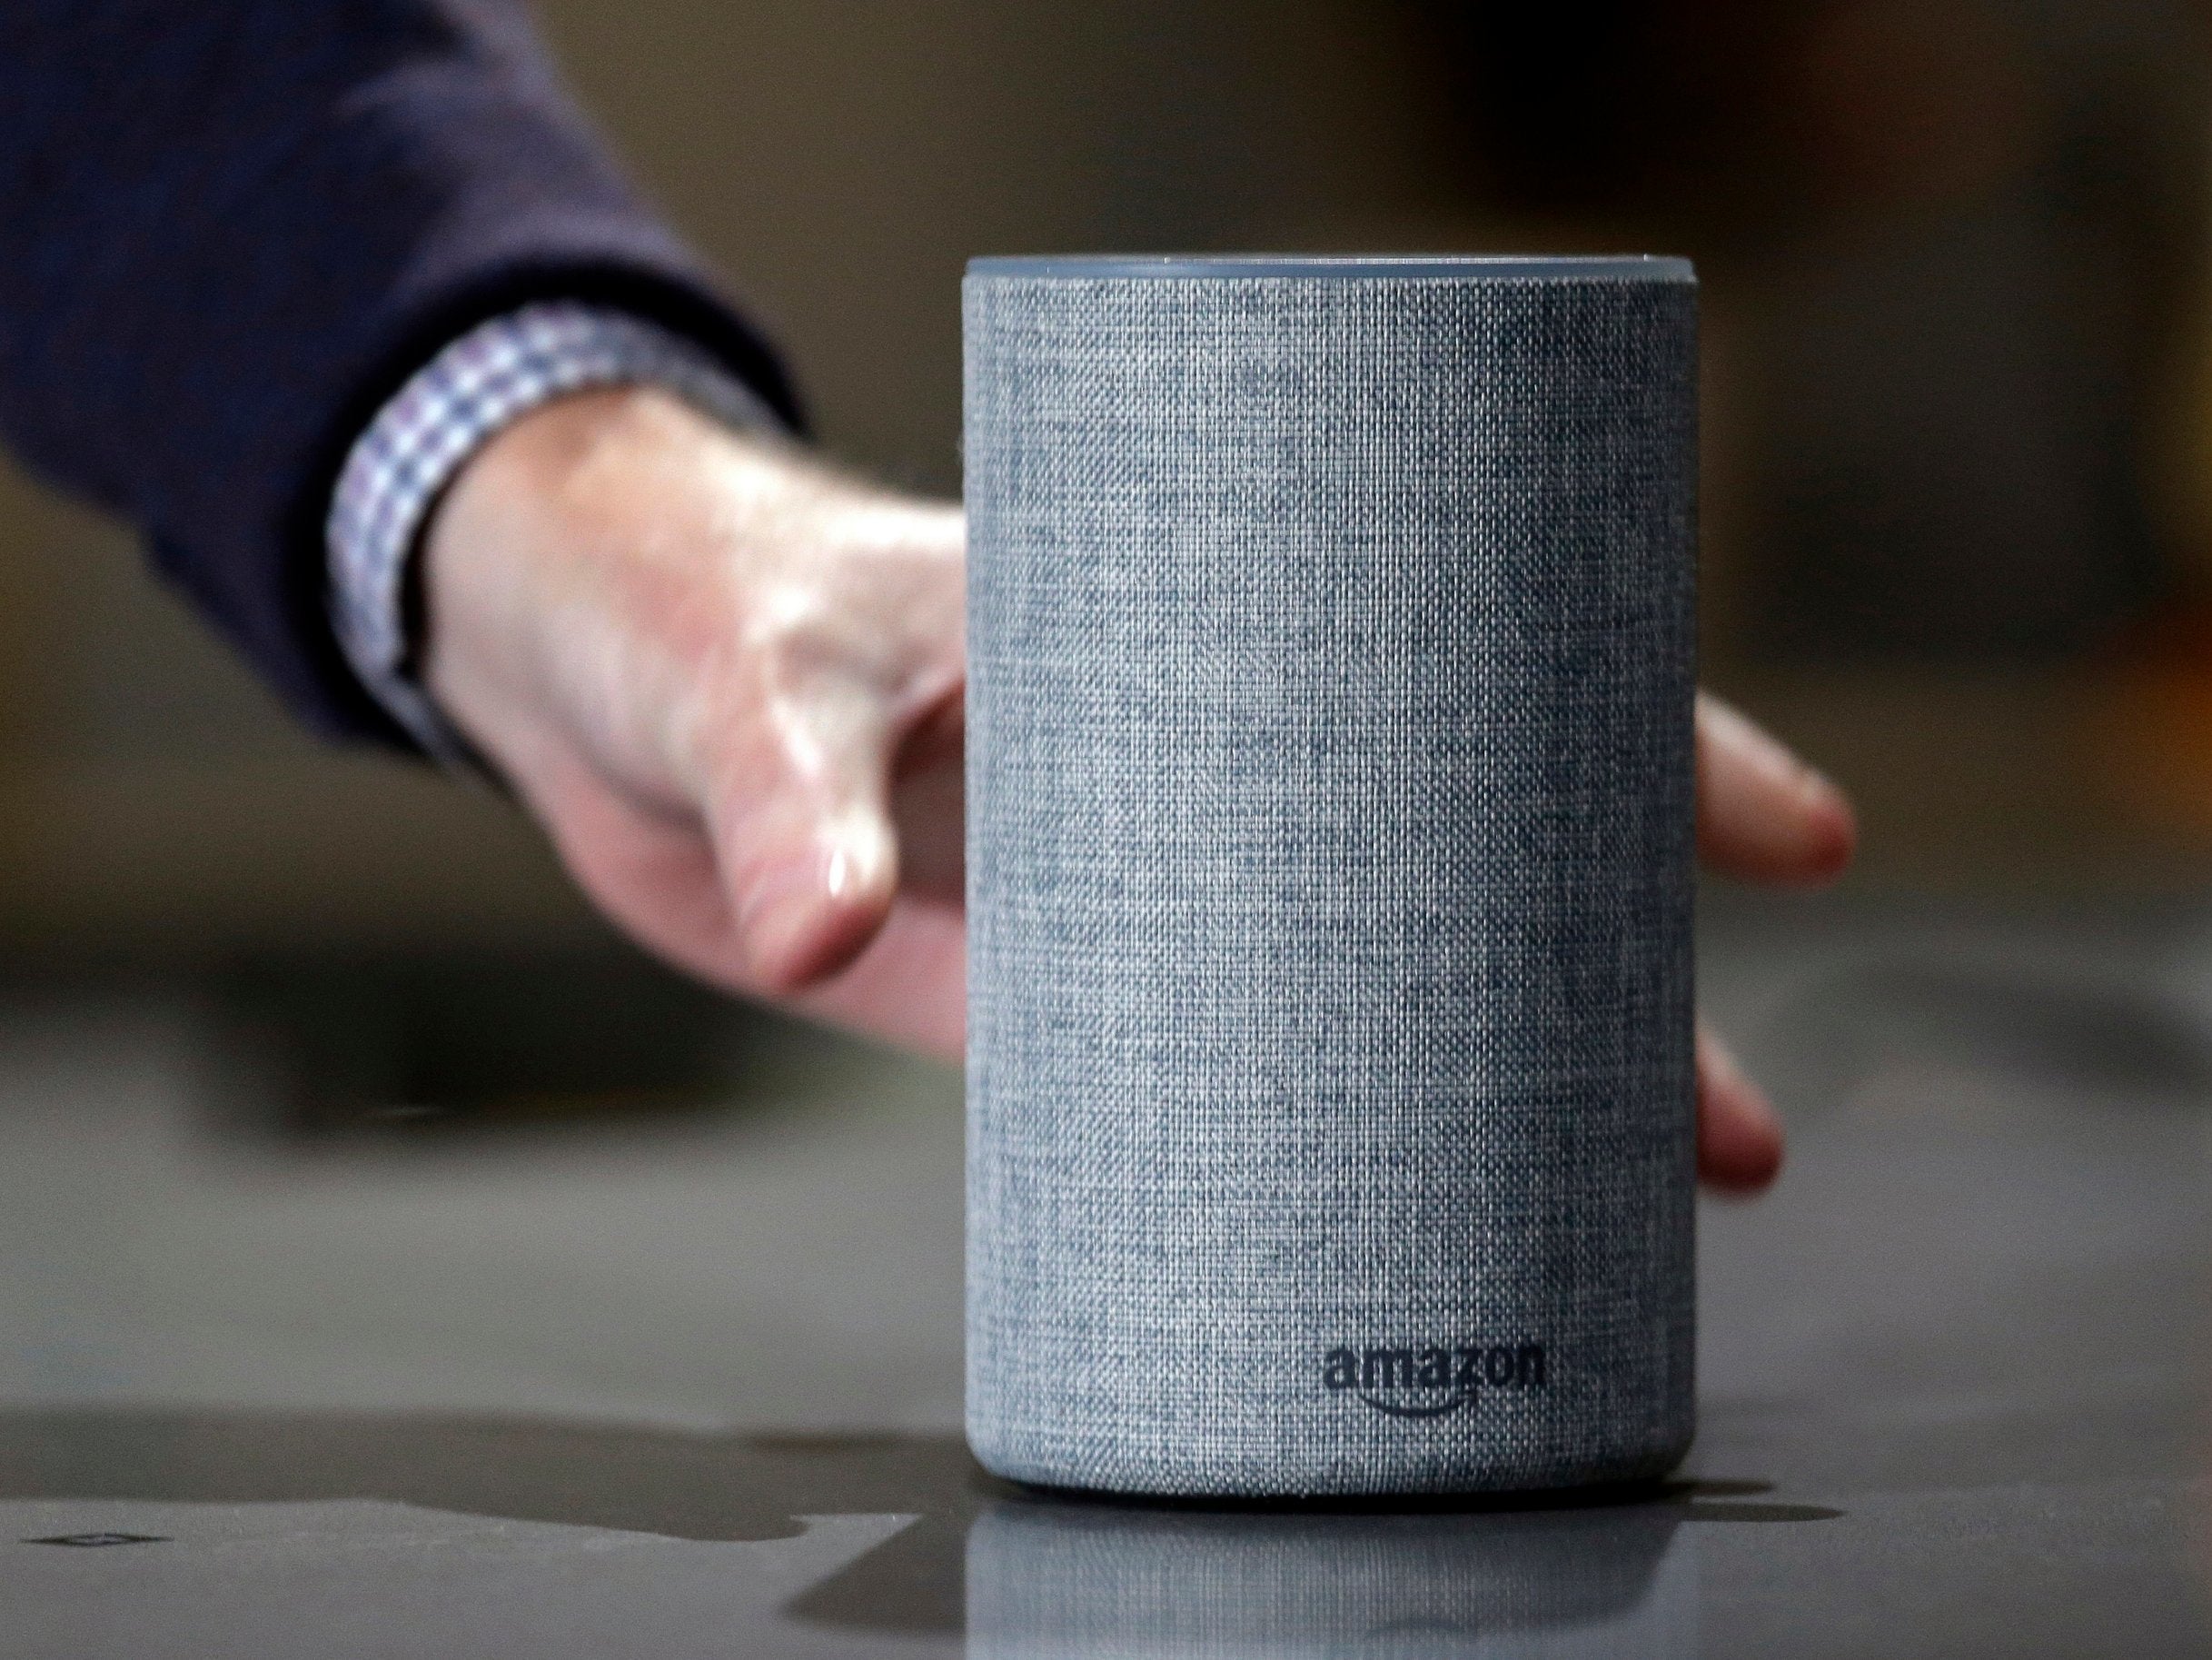 Amazon’s Alexa could be used to examine a couple’s everyday communication